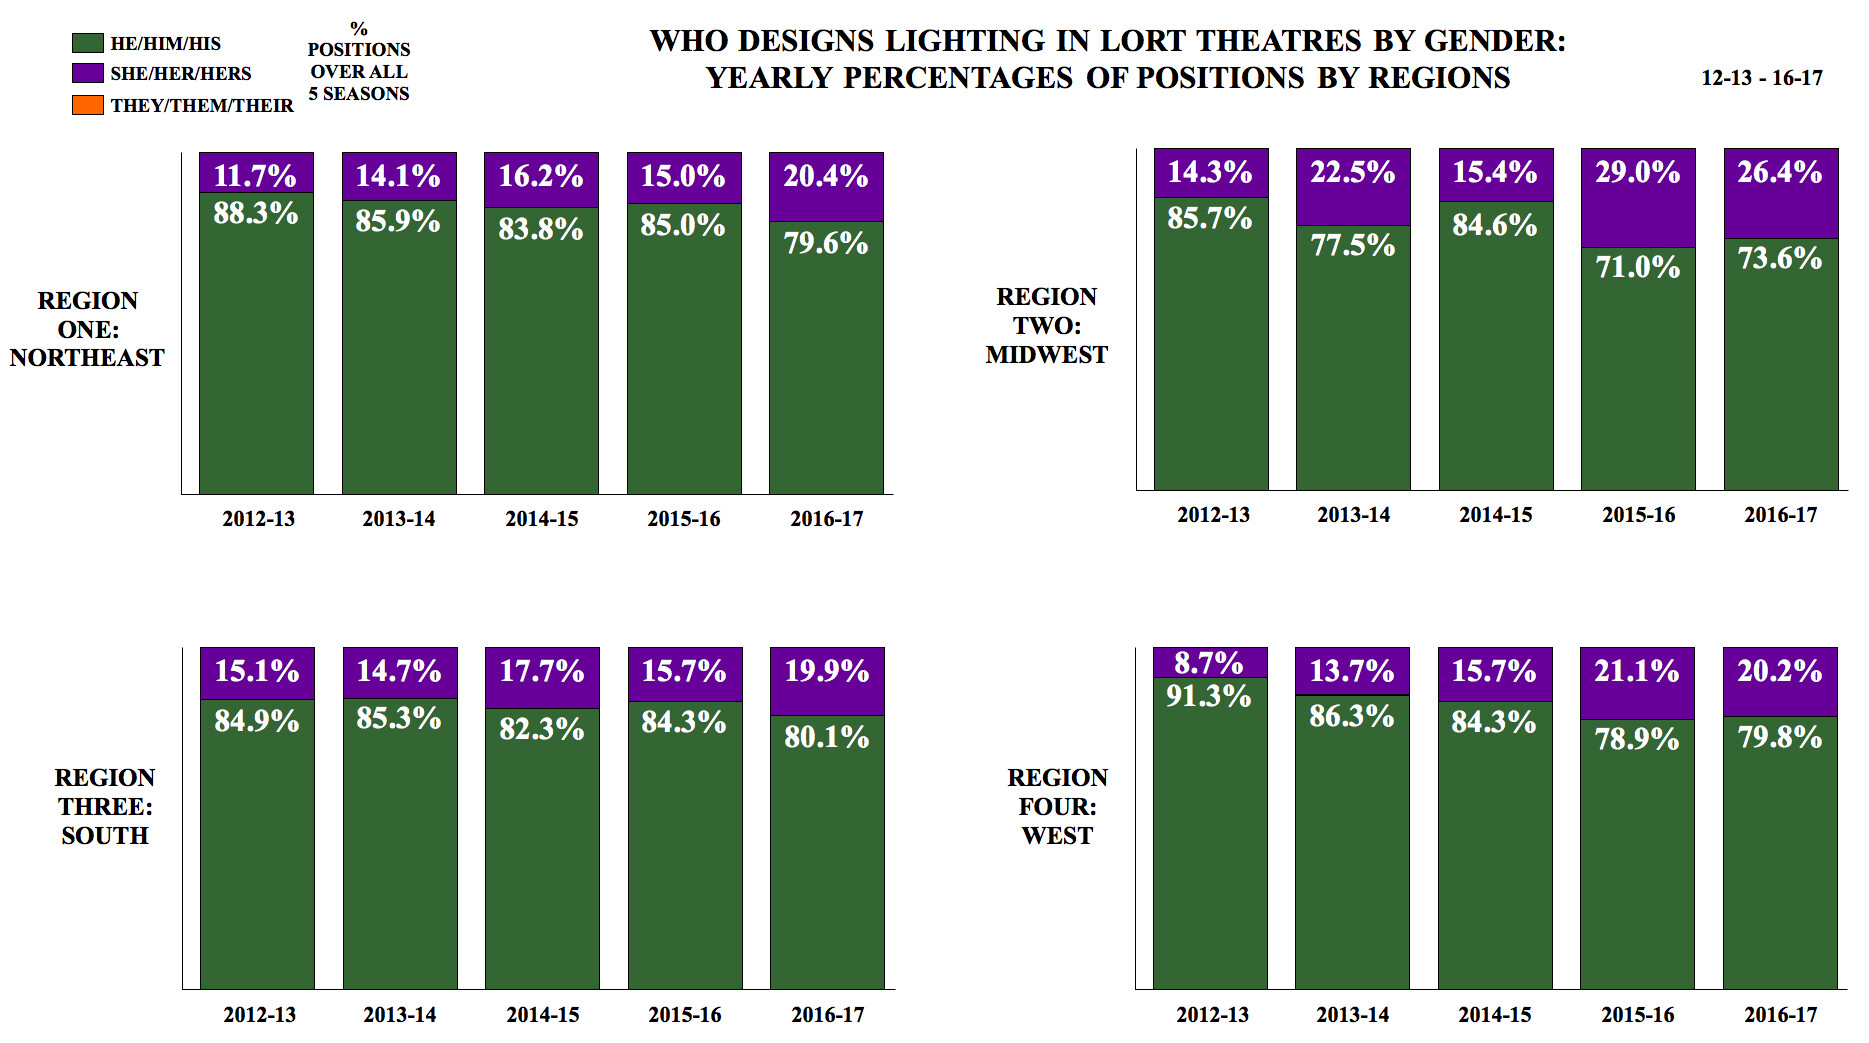 who designs lighting by region and gender